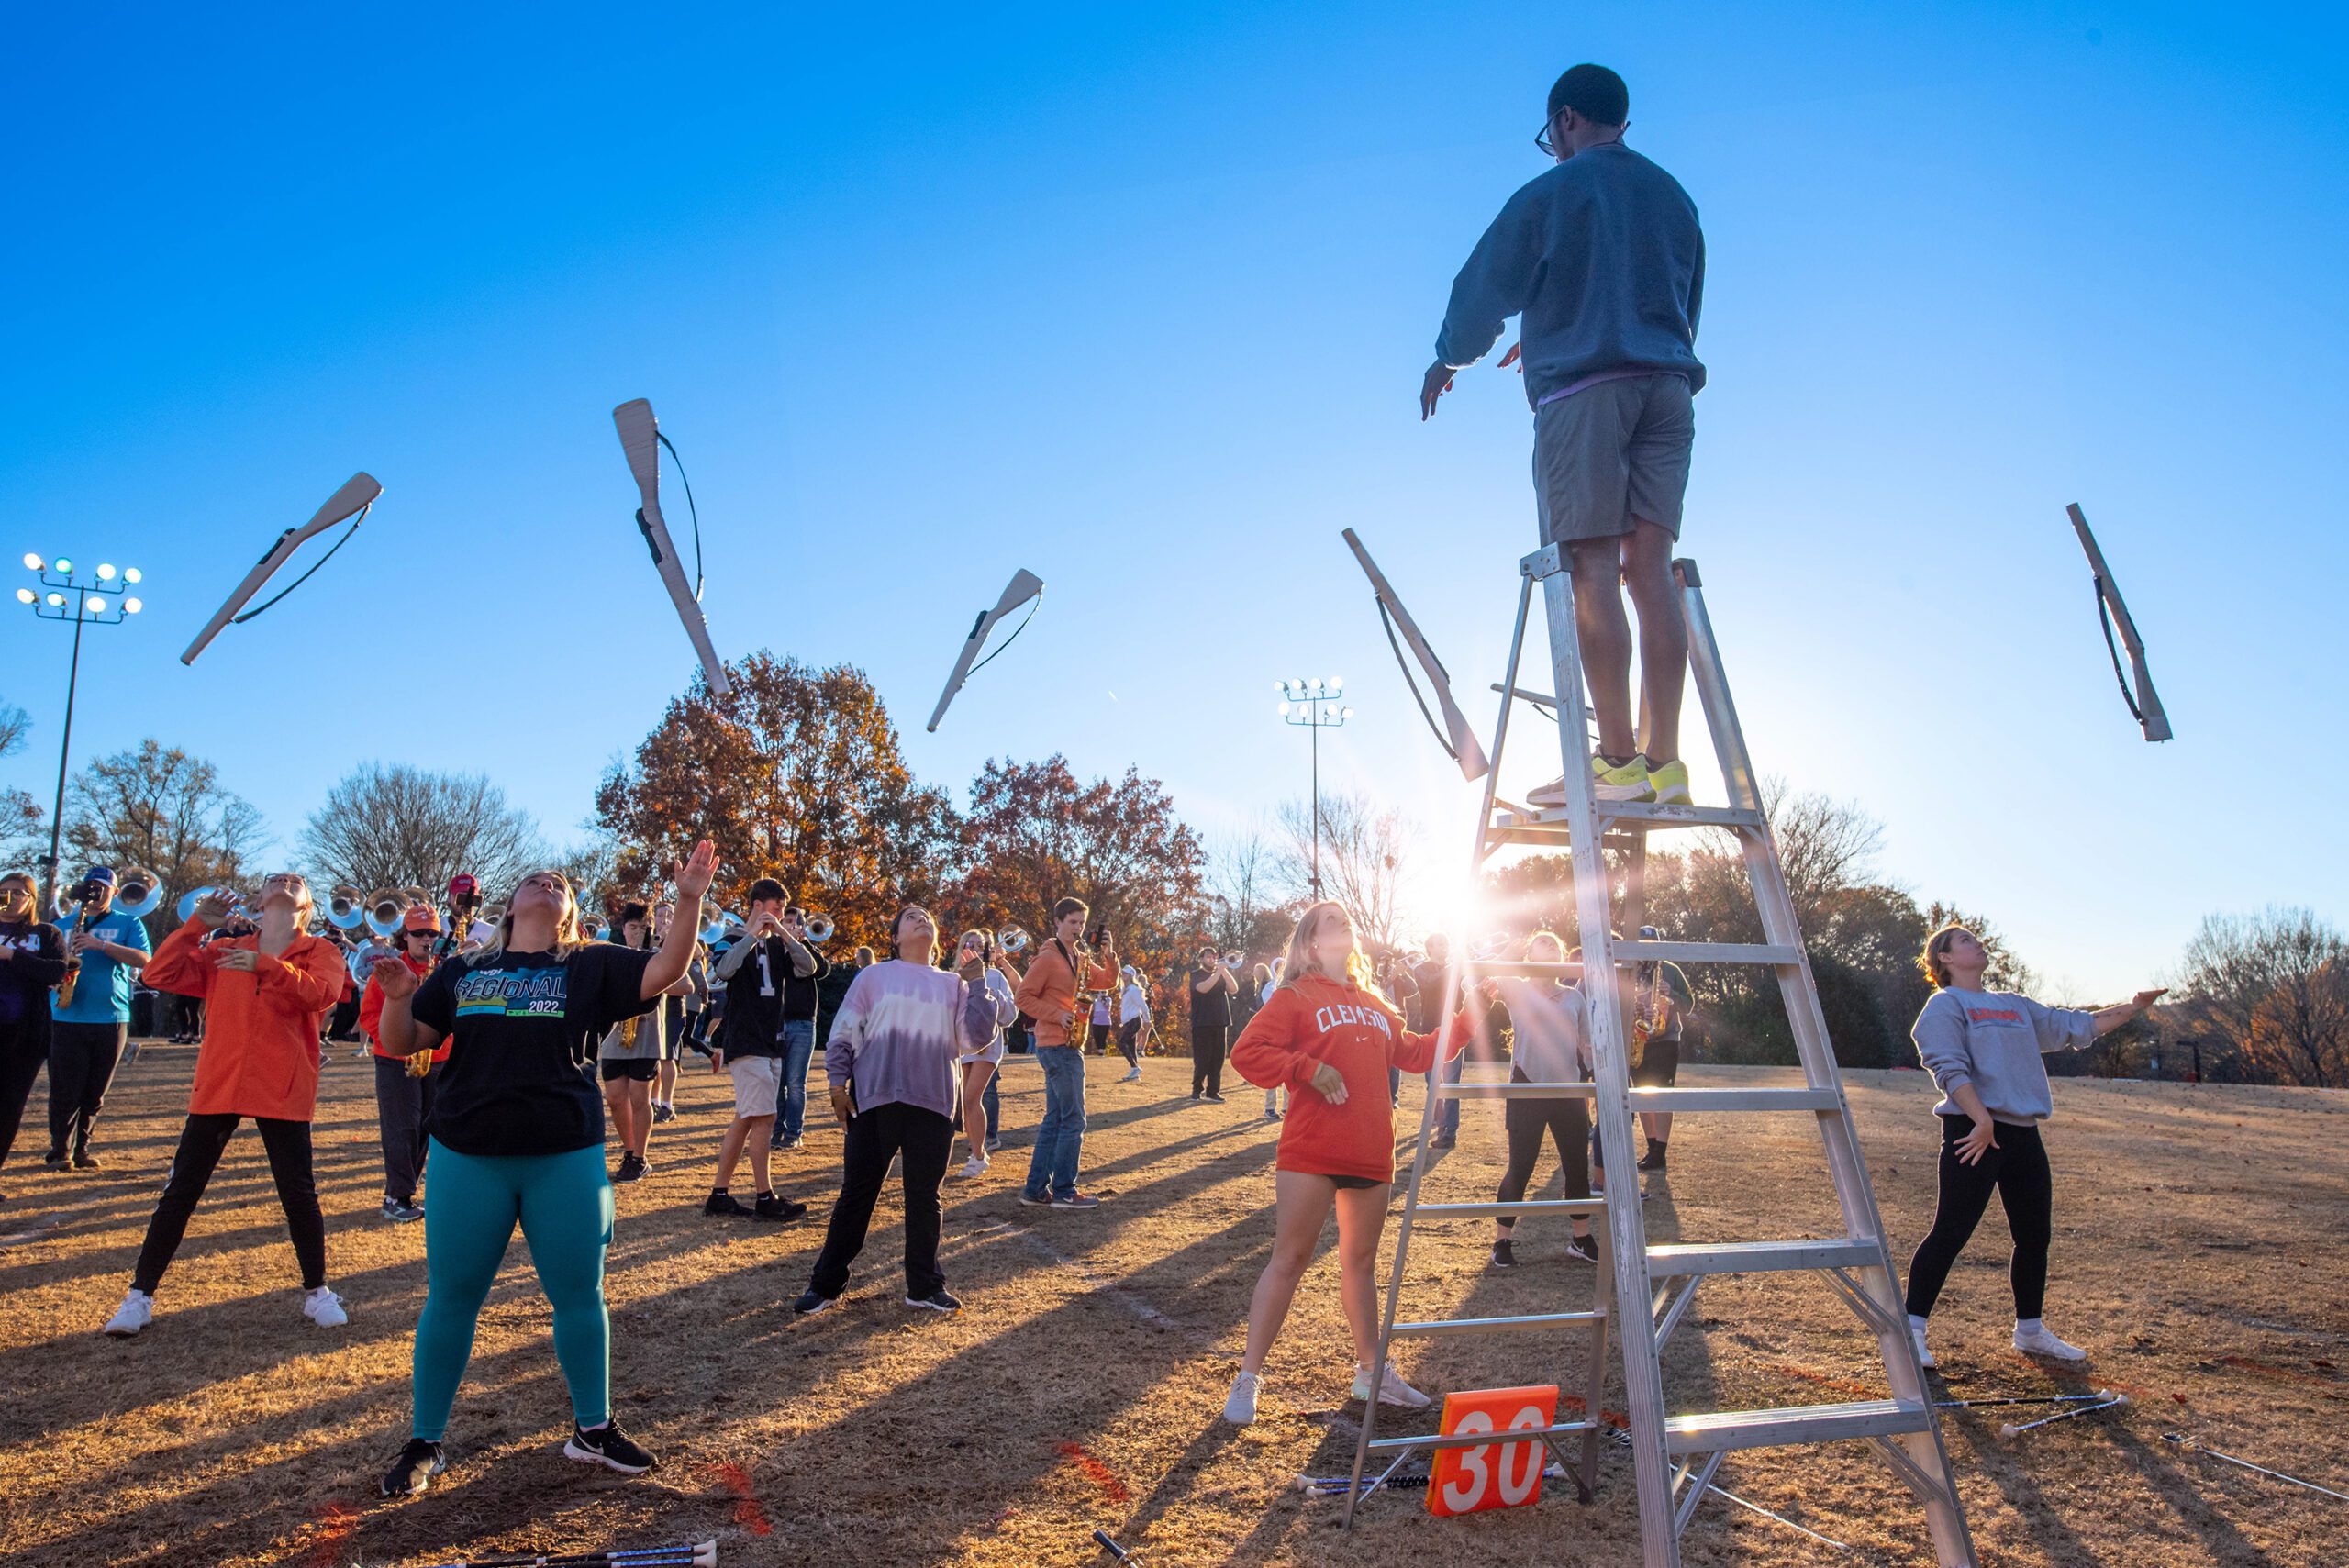 A man on a ladder directs a row of students tossing rifles into the air